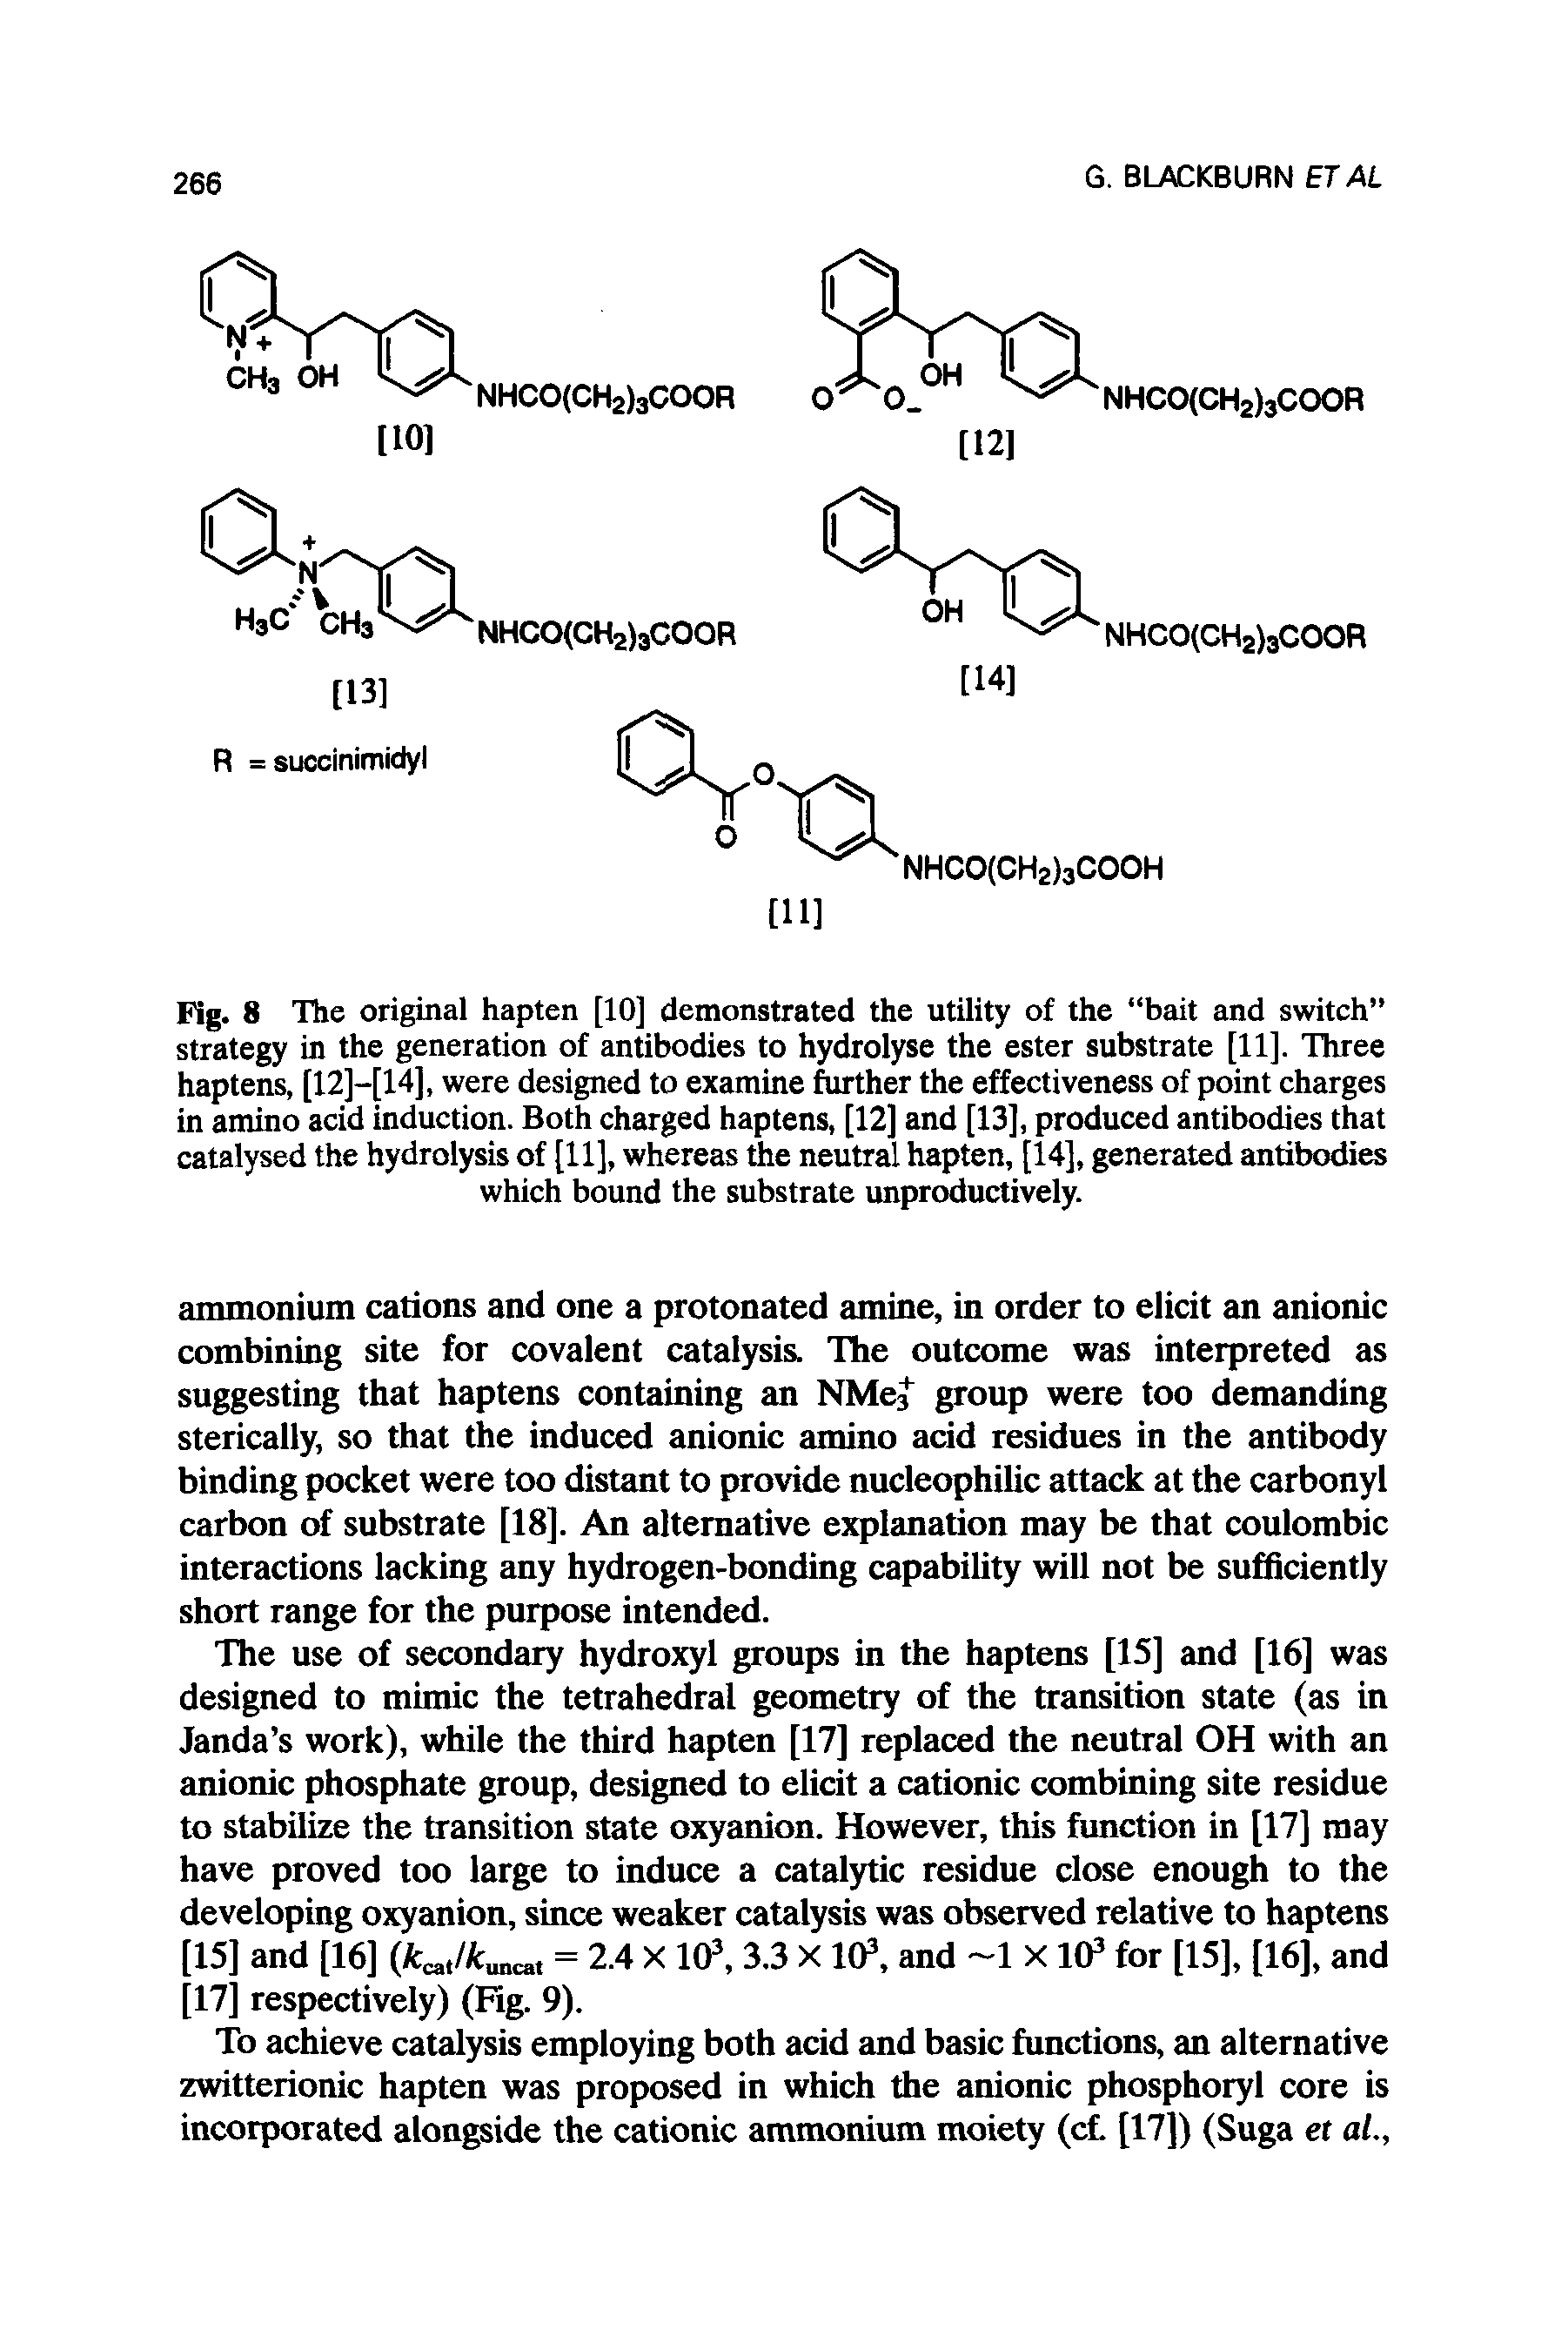 Fig. 8 The original hapten [10] demonstrated the utility of the bait and switch strategy in the generation of antibodies to hydrolyse the ester substrate [11]. Three haptens, [12]-[14], were designed to examine further the effectiveness of point charges in amino acid induction. Both charged haptens, [12] and [13], produced antibodies that catalysed the hydrolysis of [11], whereas the neutral hapten, [14], generated antibodies which bound the substrate unproductively.